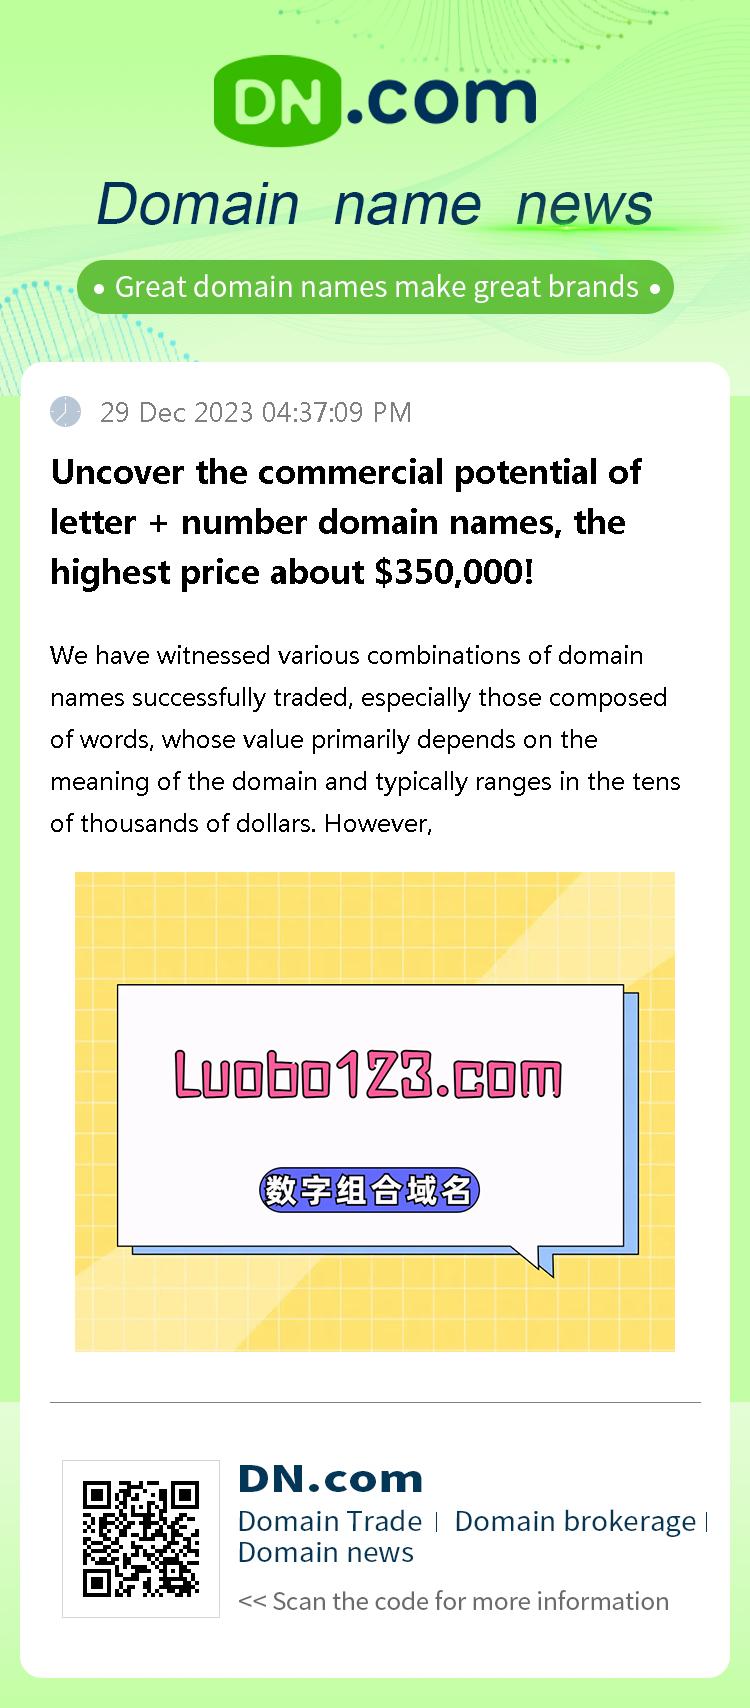 Uncover the commercial potential of letter + number domain names, the highest price about $350,000!